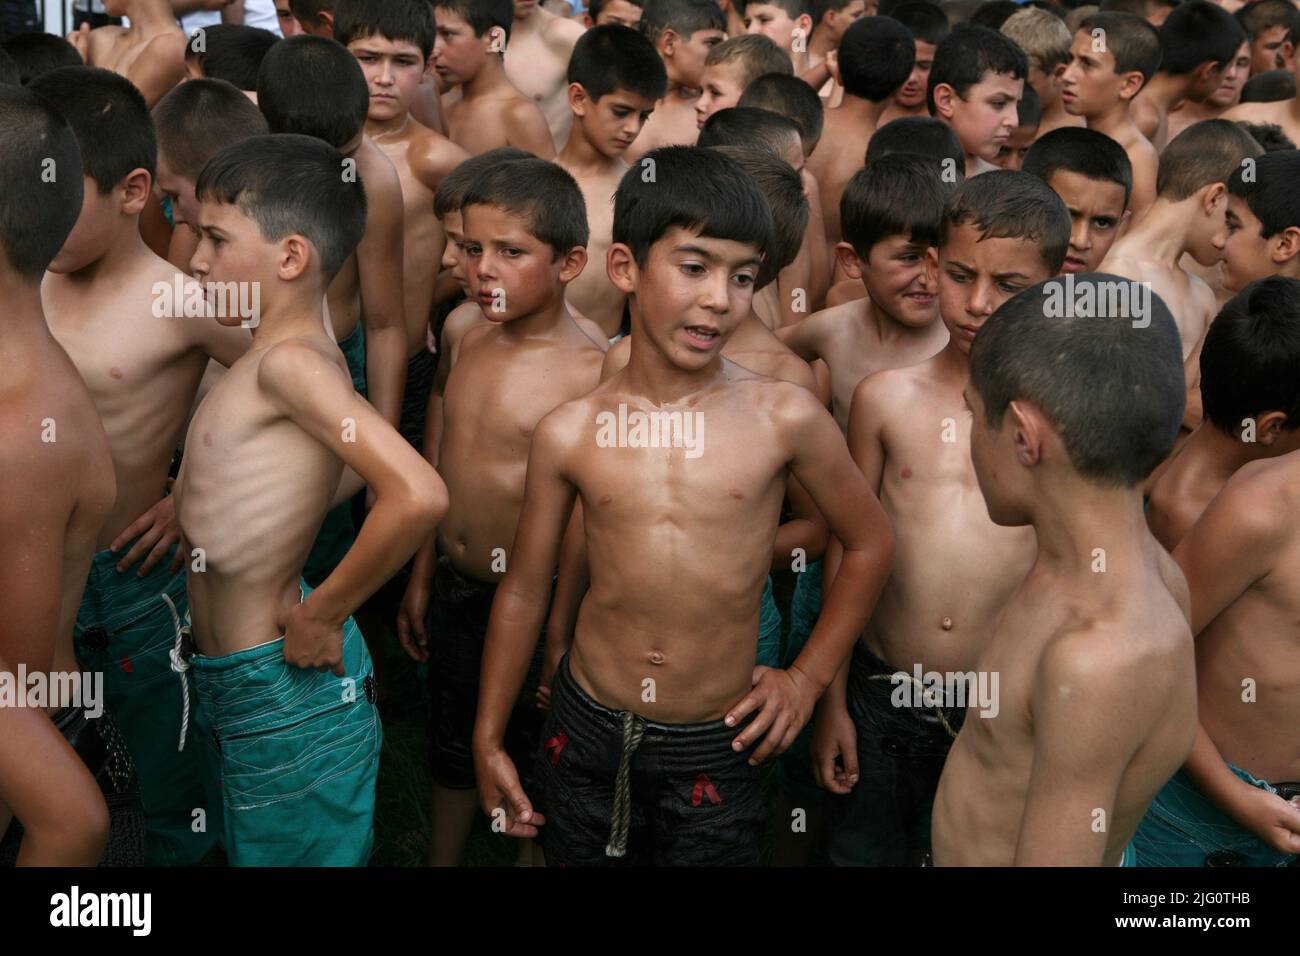 Kırkpınar (Turkish Oil Wrestling). Young wrestlers wait for the beginning of the opening ceremony on the stadium during the 648th Kırkpınar Tournament in Edirne, Turkey, on 3 July 2009. Kırkpınar wrestlers compete stripped to the waist and smeared their bodies with olive oil. About one thousand wrestlers from across the country, the winners of regional competitions, attend the three-day tournament every year. Stock Photo